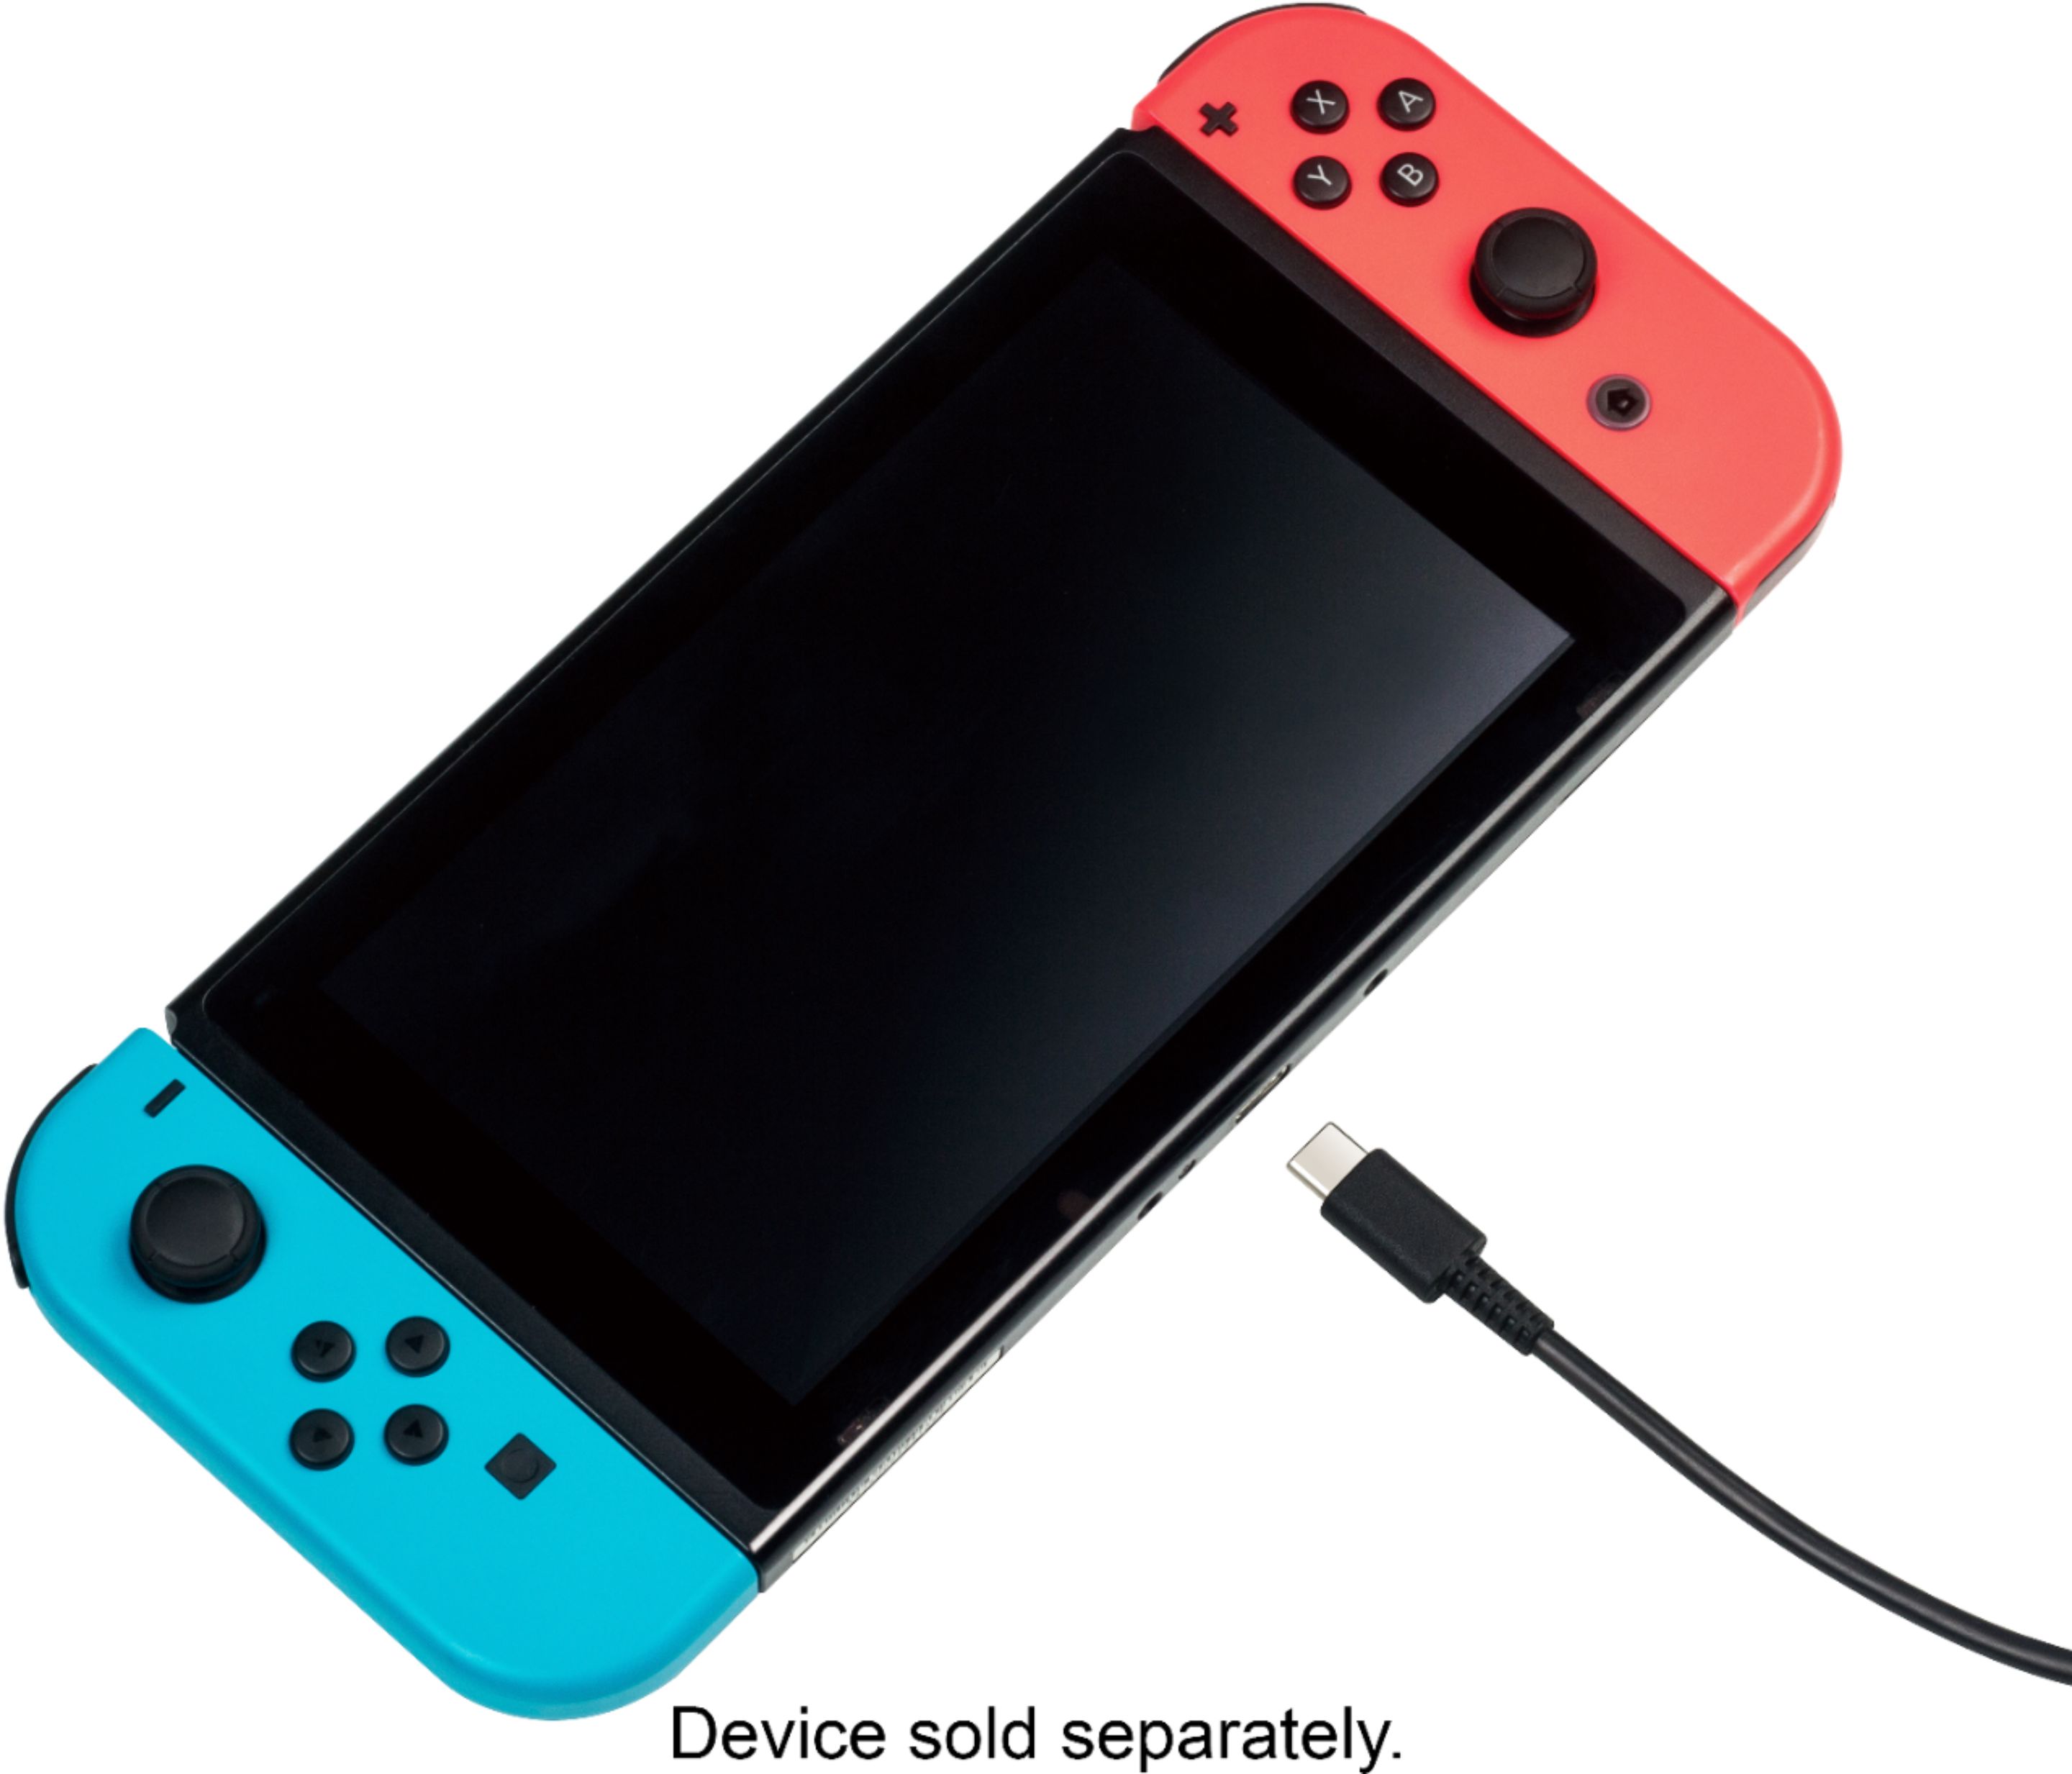 Scosche FlyTunes Nintendo Switch OLED Bluetooth Adapter Dongle - Black